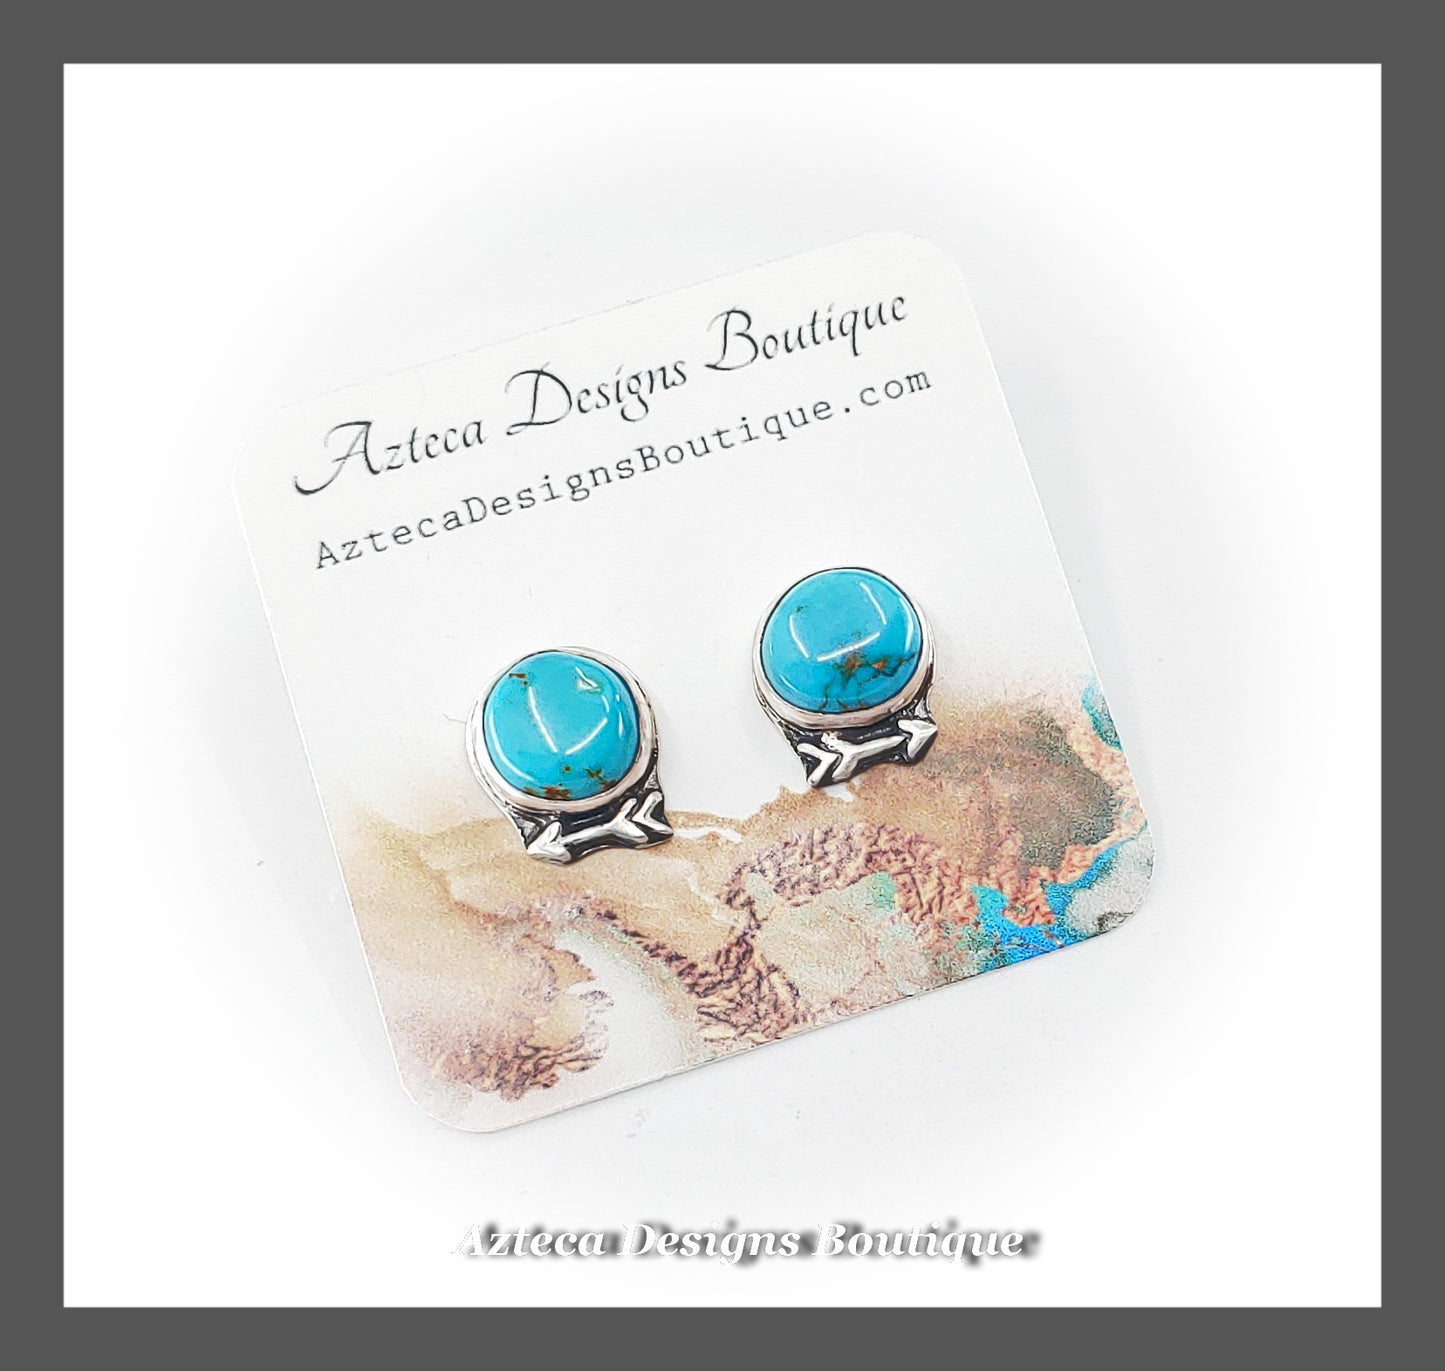 Blue Sierra Nevada Turquoise + Hand Fabricated Sterling Silver Post Earrings